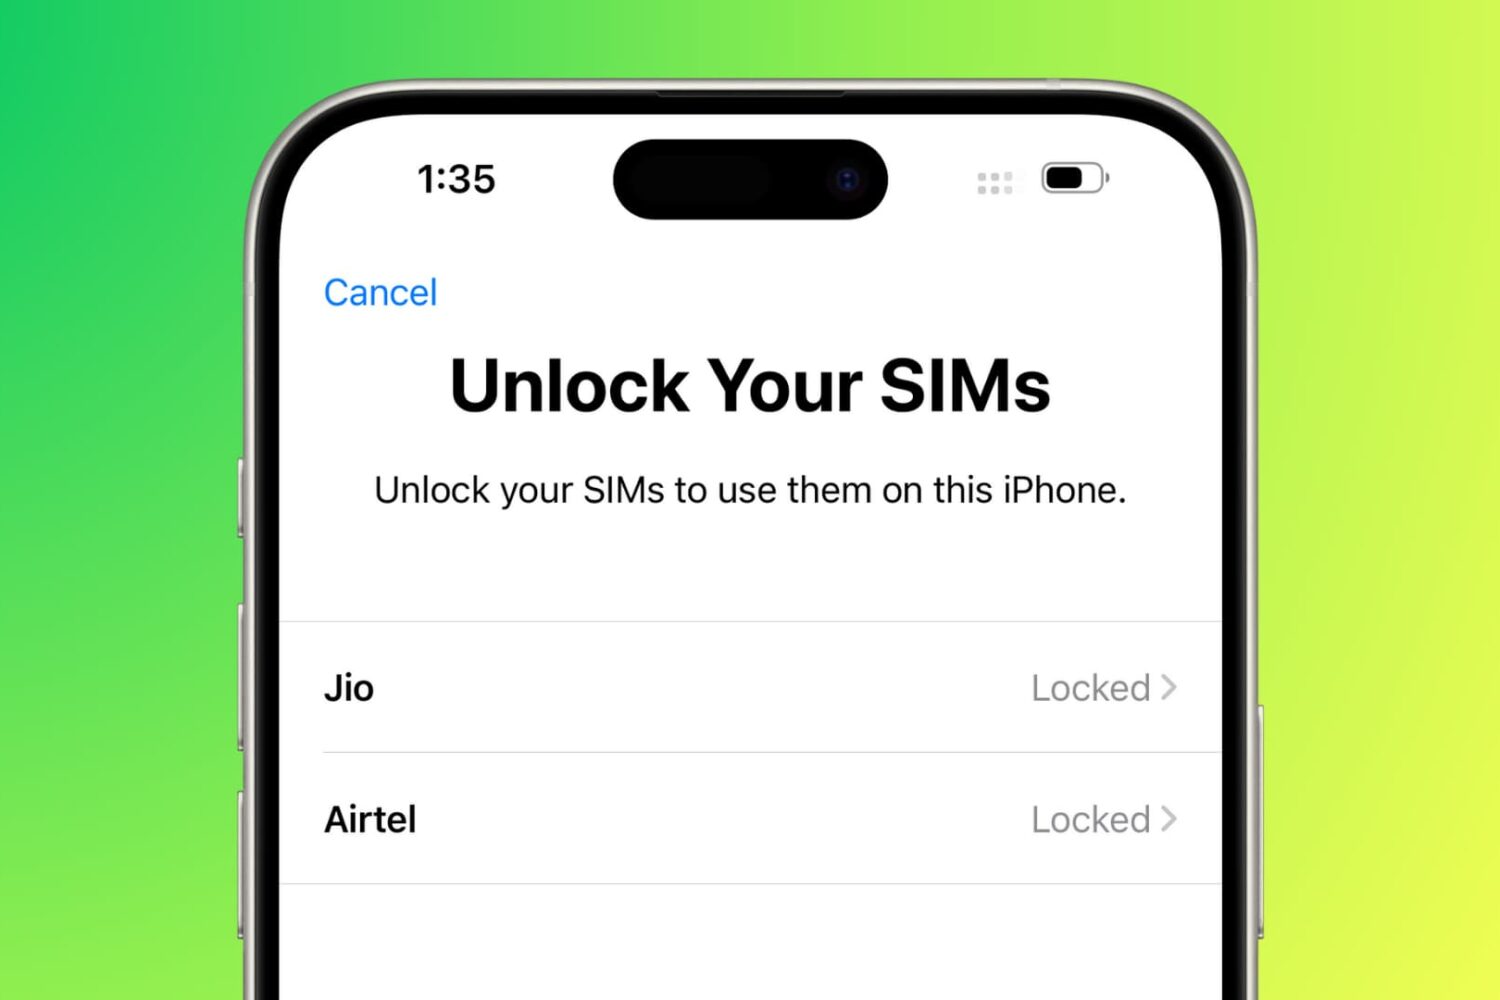 Unlock Your SIMs on iPhone